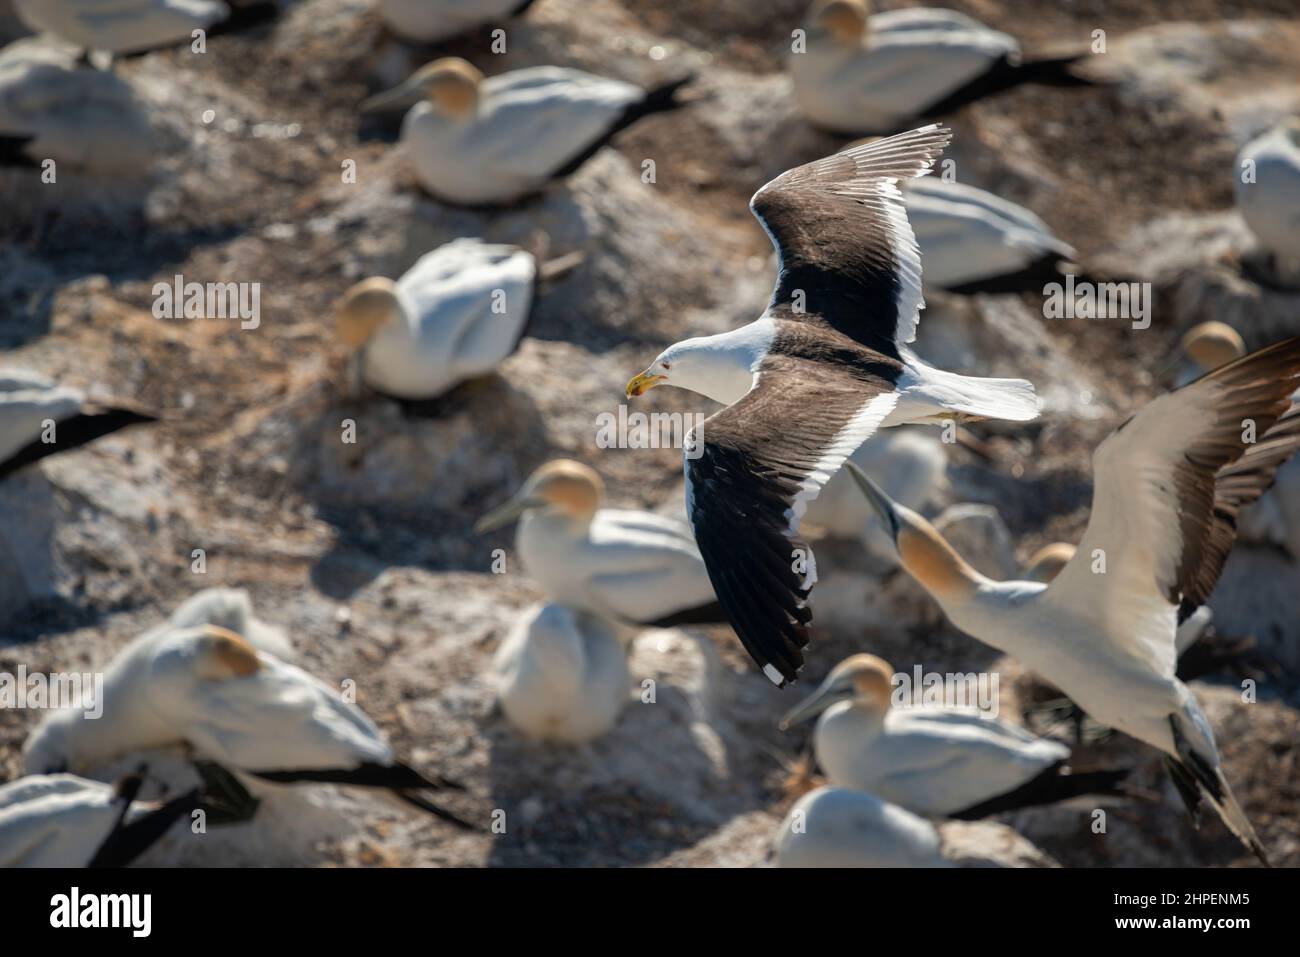 Gannet bird flying back to the colony. High angle view. Muriwai Gannet Colony, Auckland. Stock Photo